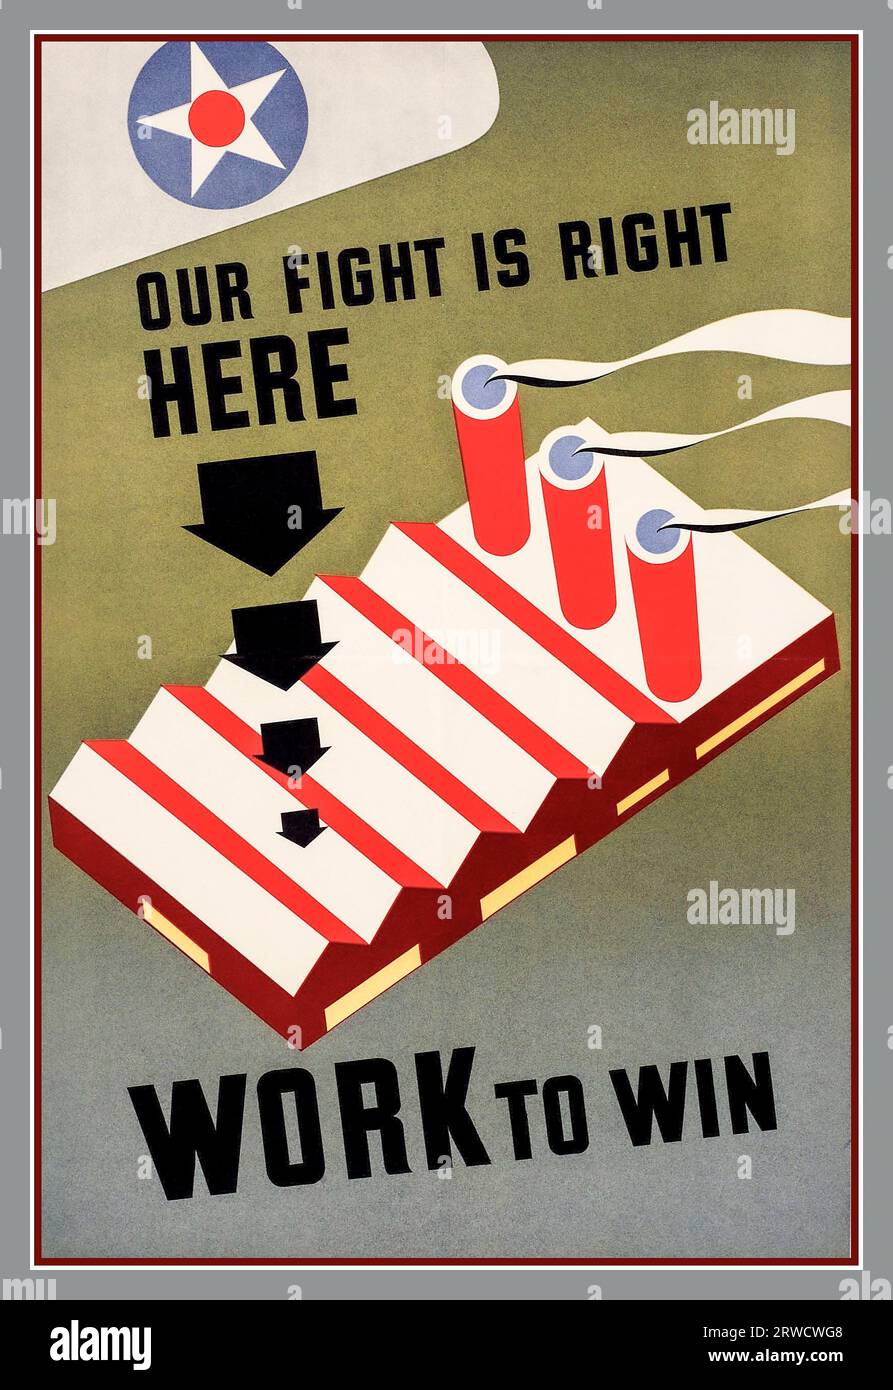 WW2 USA Propaganda Poster 1940s Factory War Production 'Our Fight Starts Right Here'  WORK TO WIN. with USAF aircraft roundel featured. USA American propaganda war work output reminder and motivational poster World War II Stock Photo